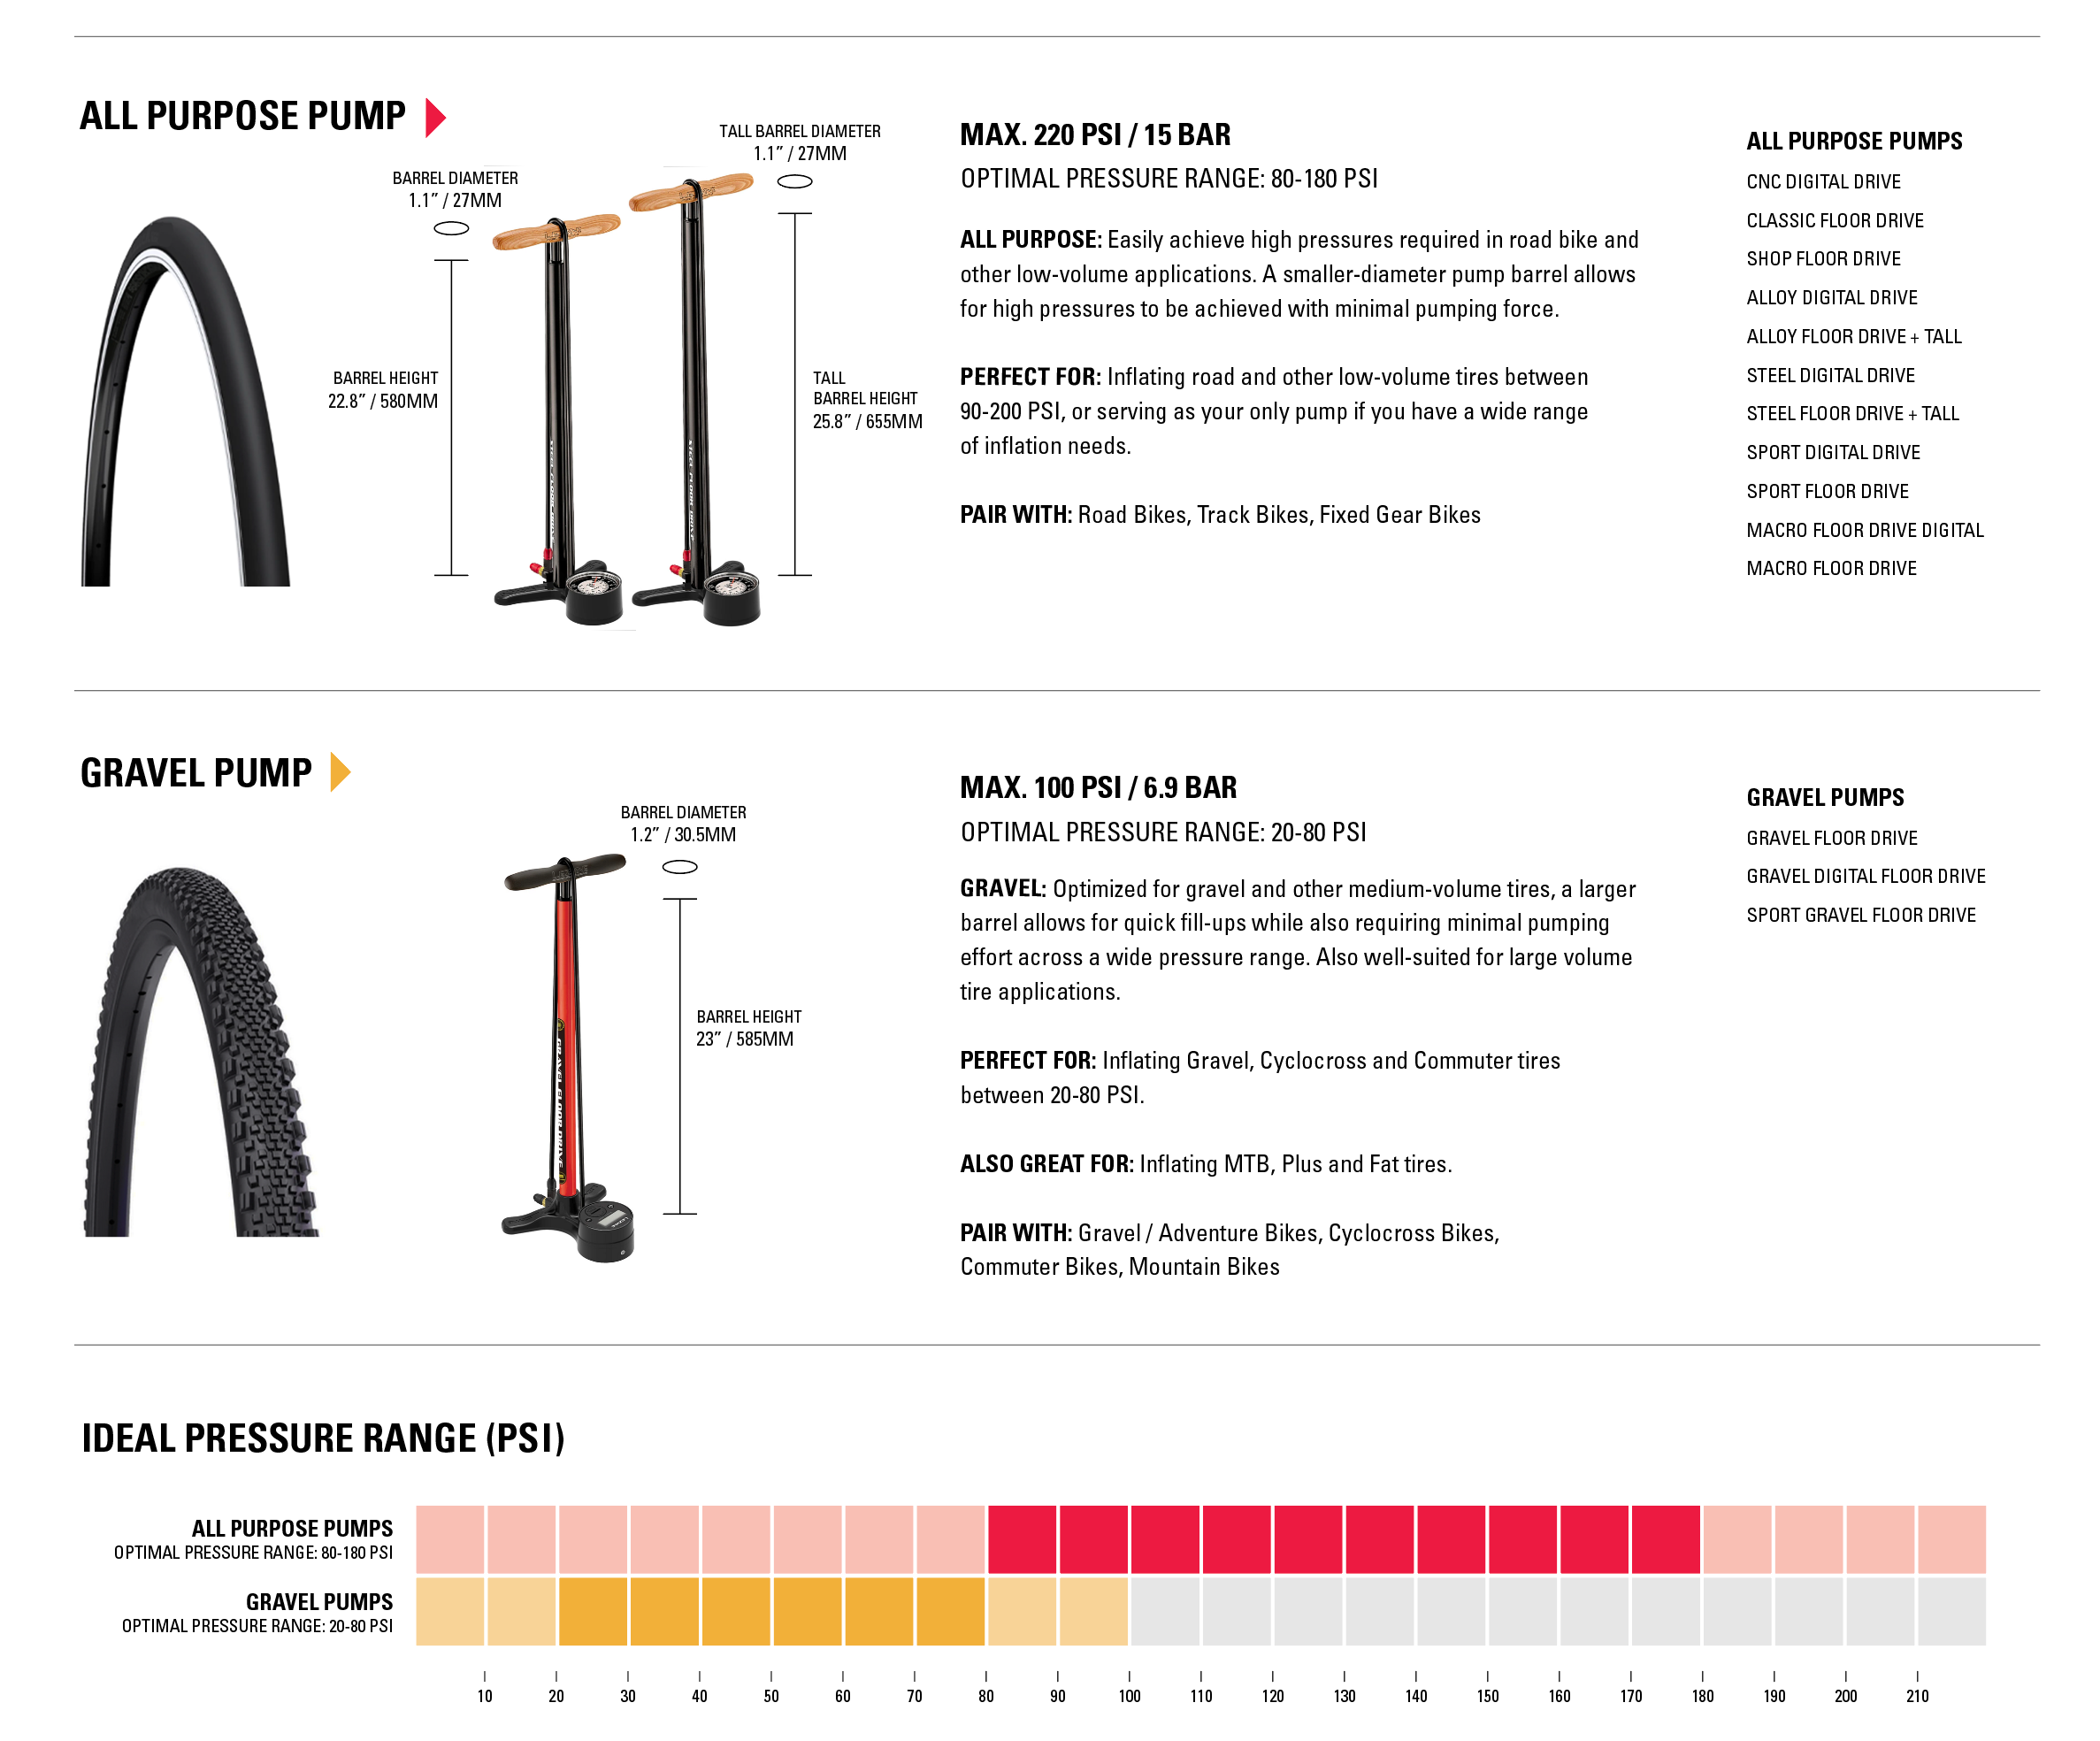 spec chart that describes the differences between the all purpose pump and the gravel pump